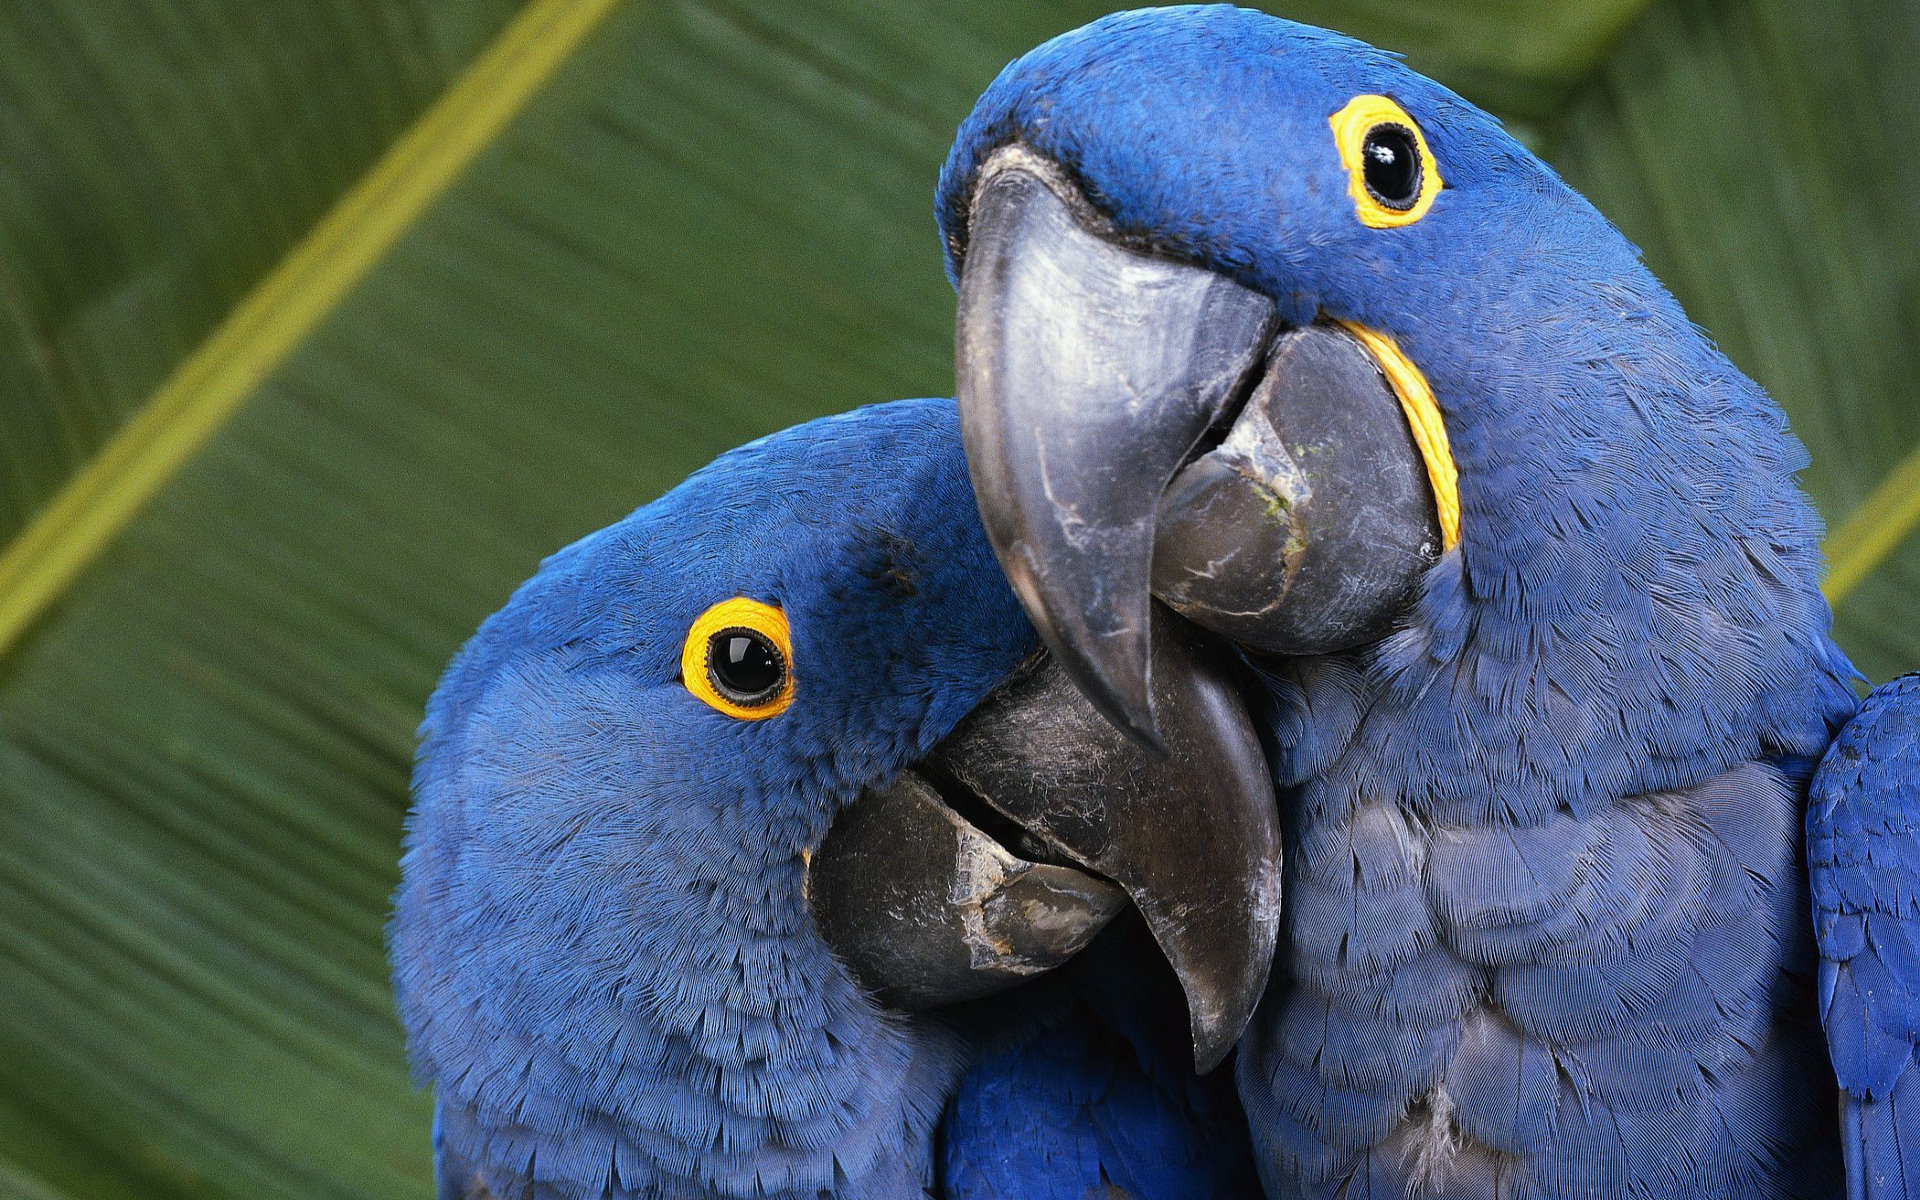  Explore the Collection Birds Parrots Hyacinth Macaw